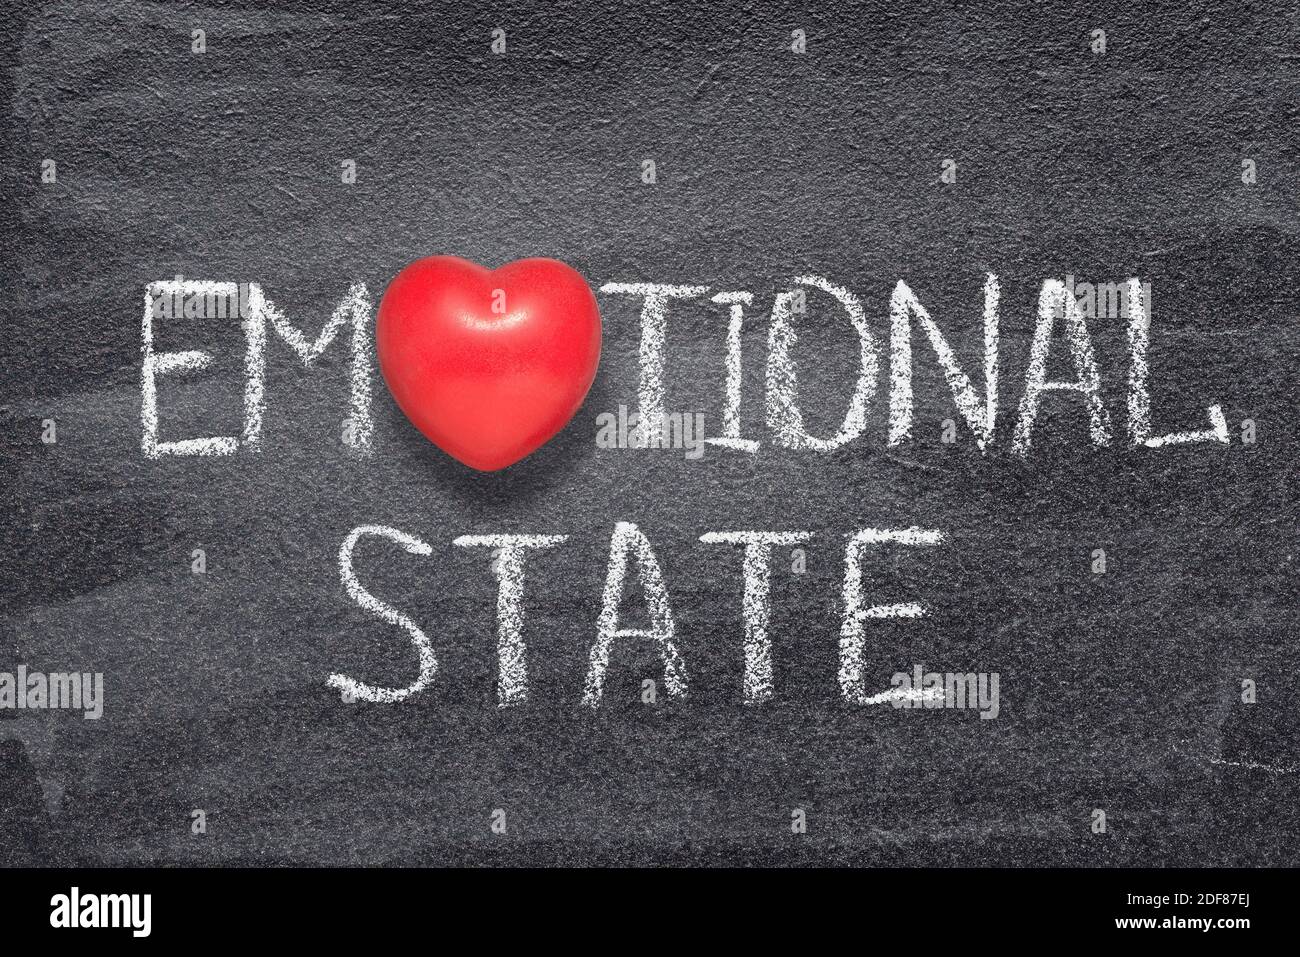 emotional state phrase handwritten on chalkboard with red heart symbol instead of O Stock Photo